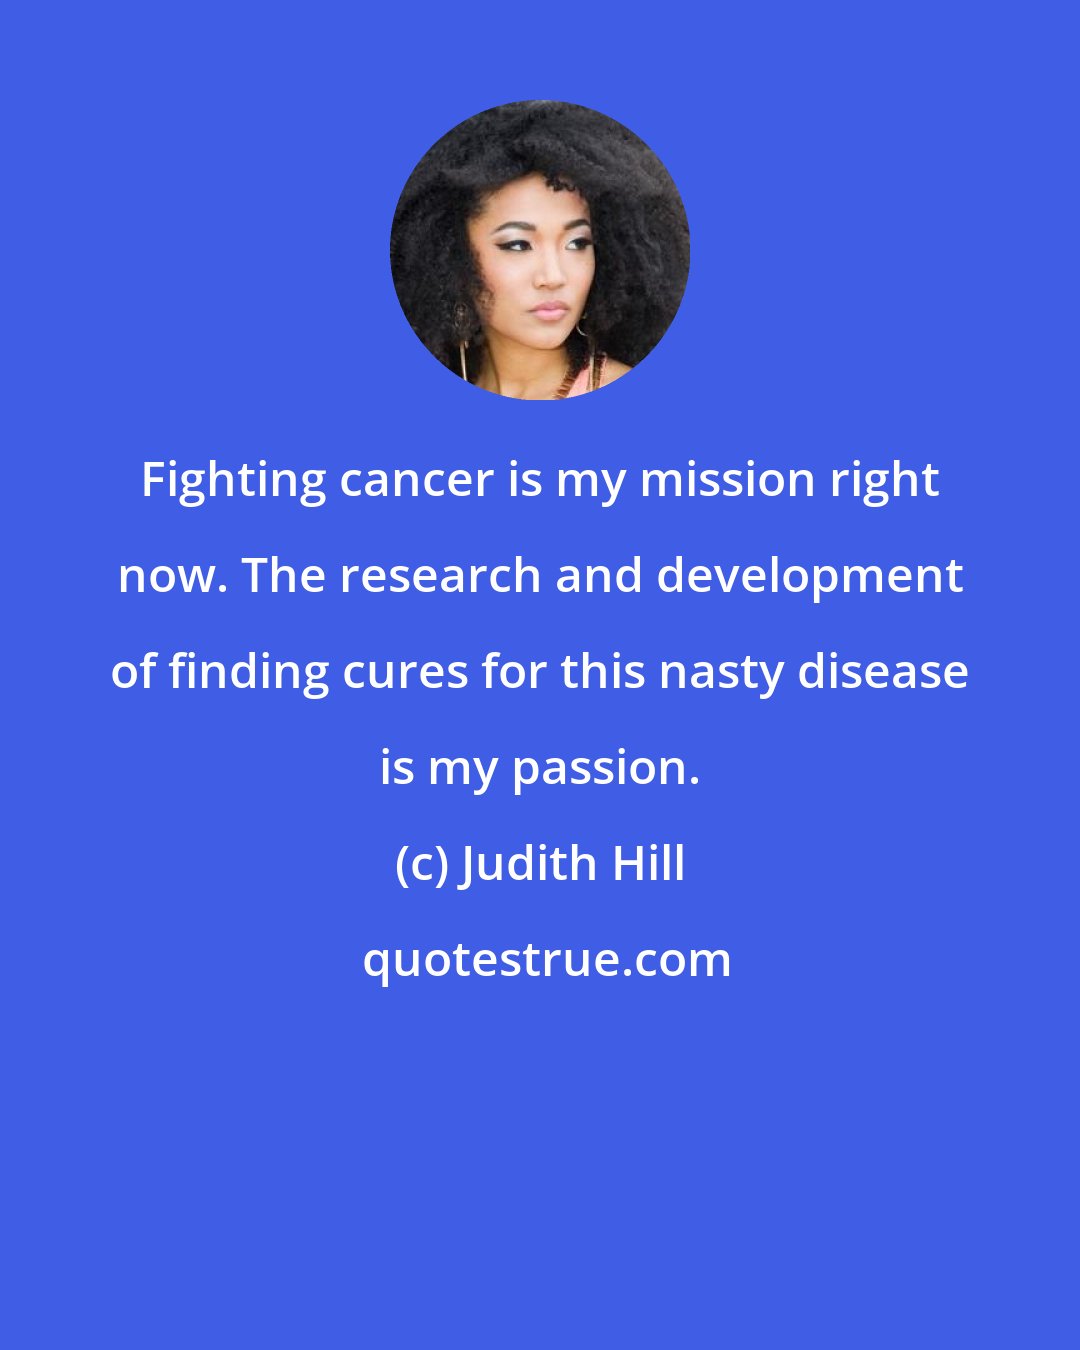 Judith Hill: Fighting cancer is my mission right now. The research and development of finding cures for this nasty disease is my passion.